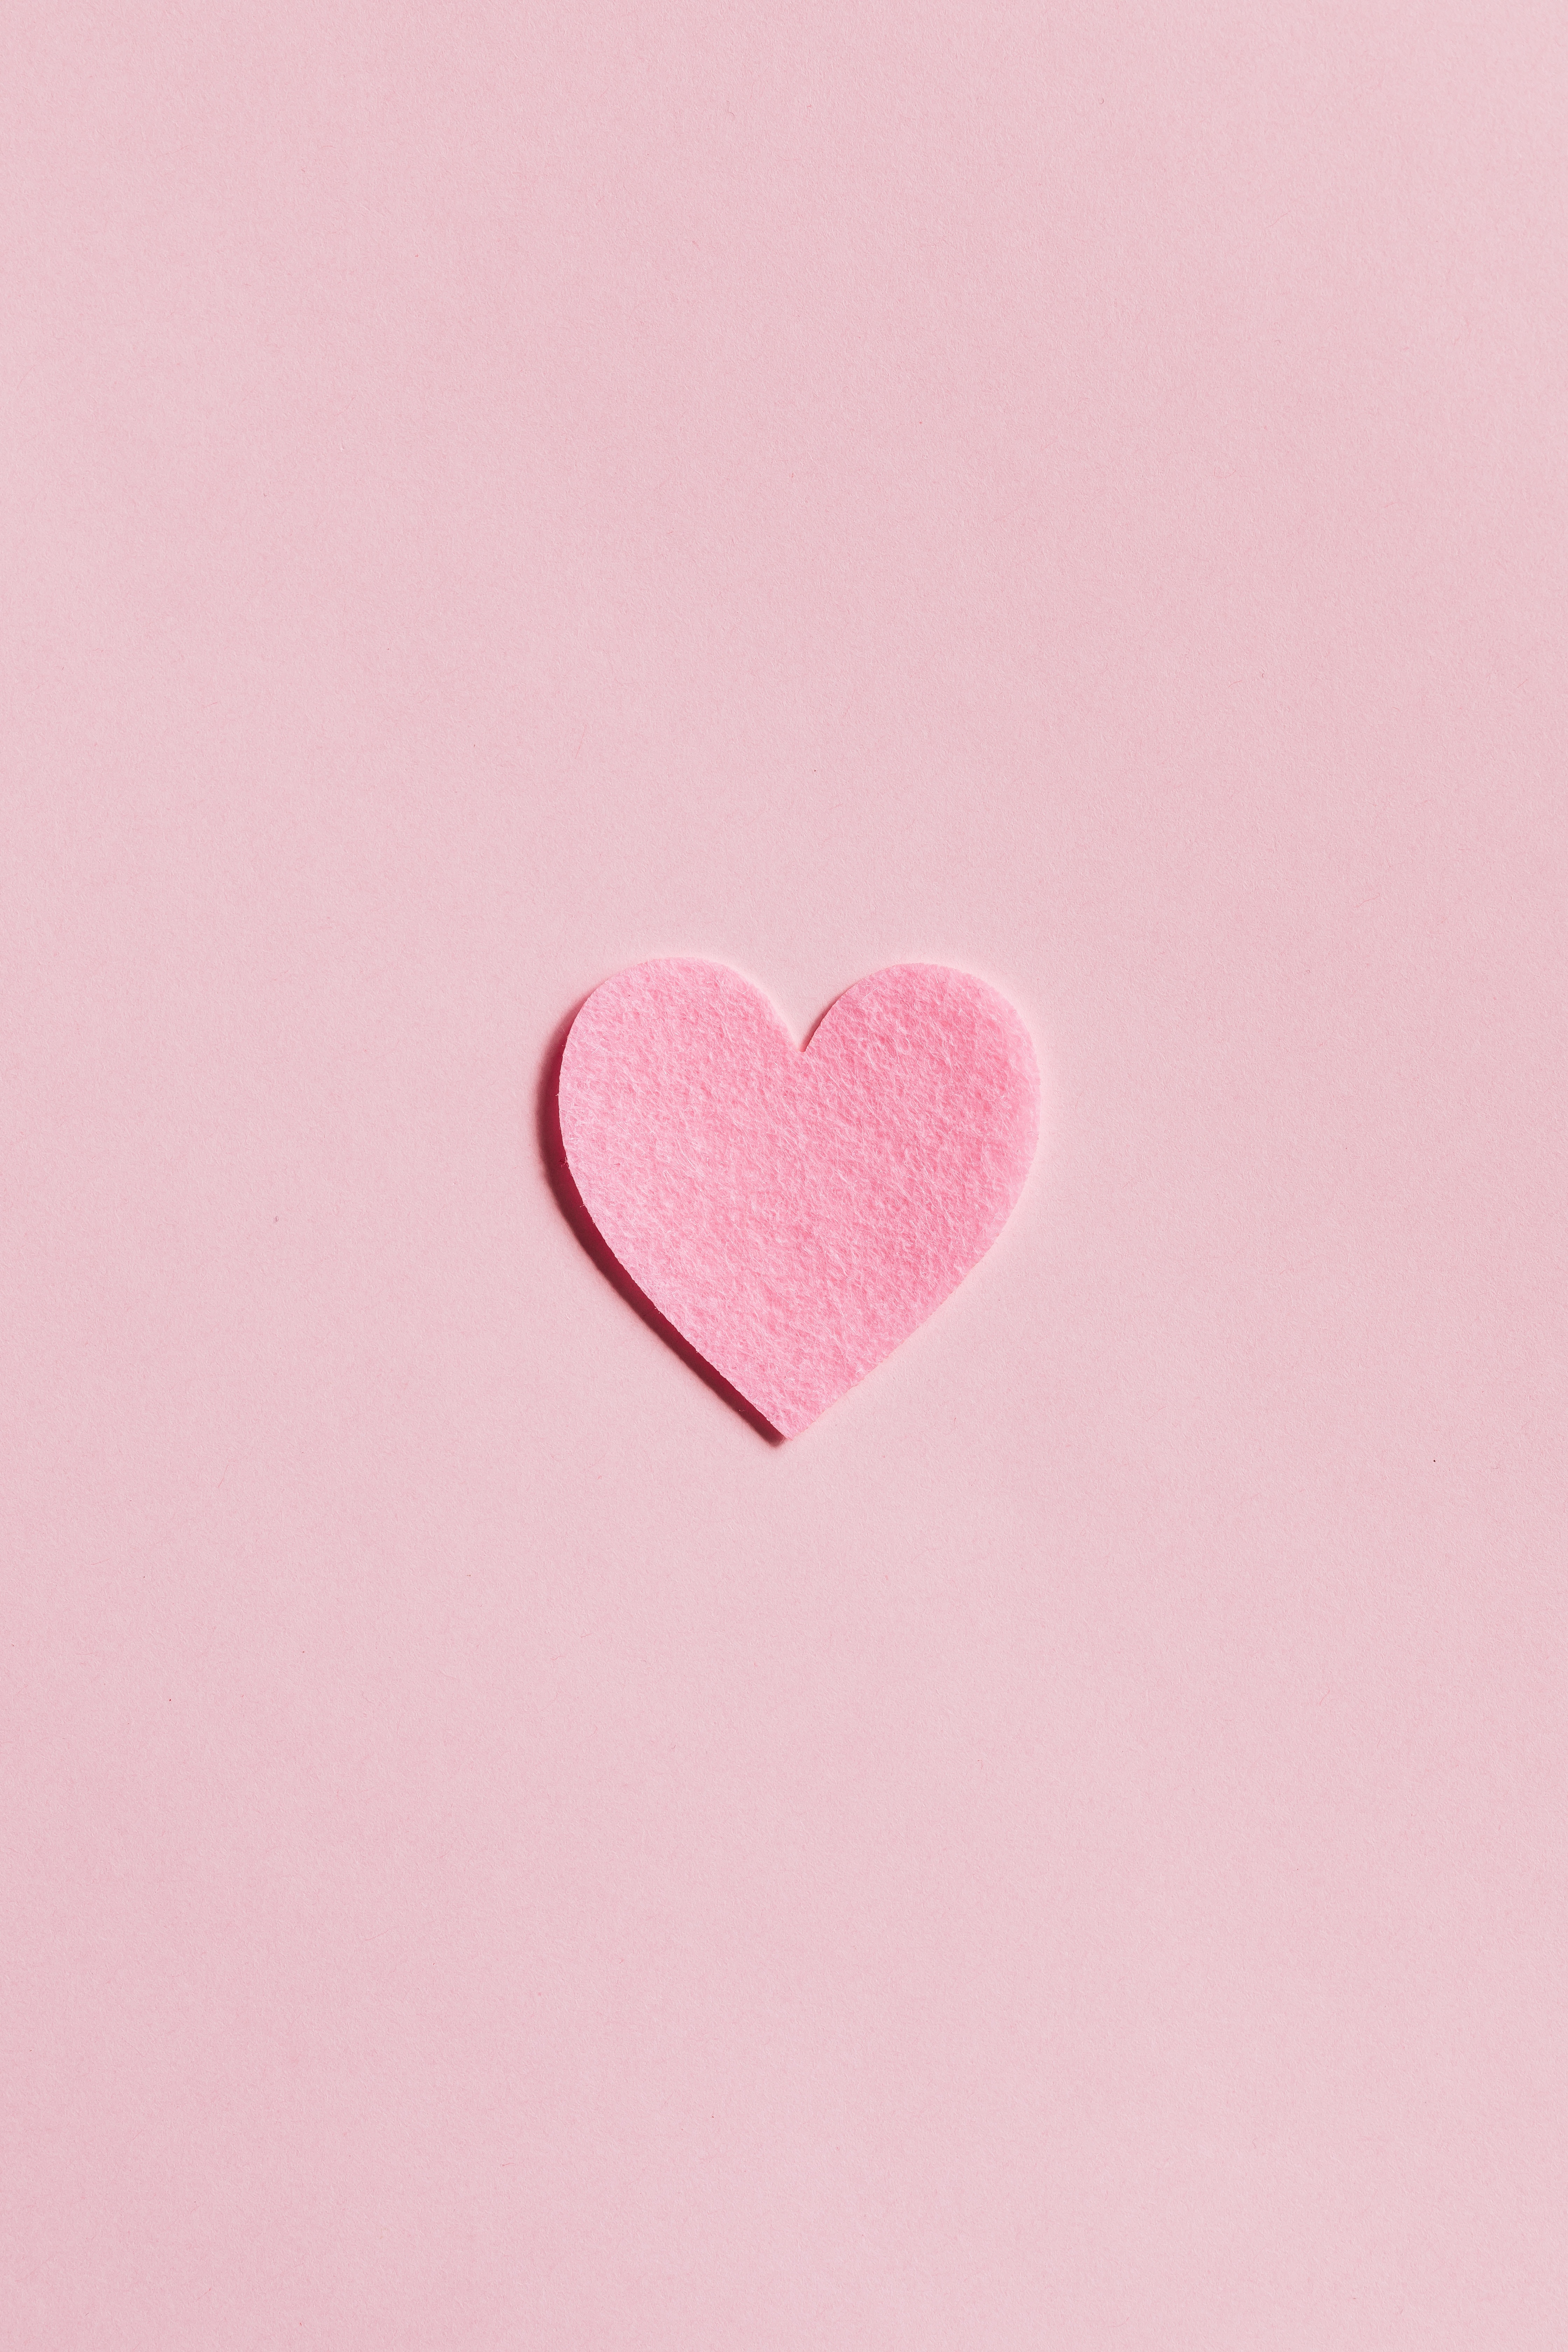 A pink heart shaped paper on top of some light colored background - Heart